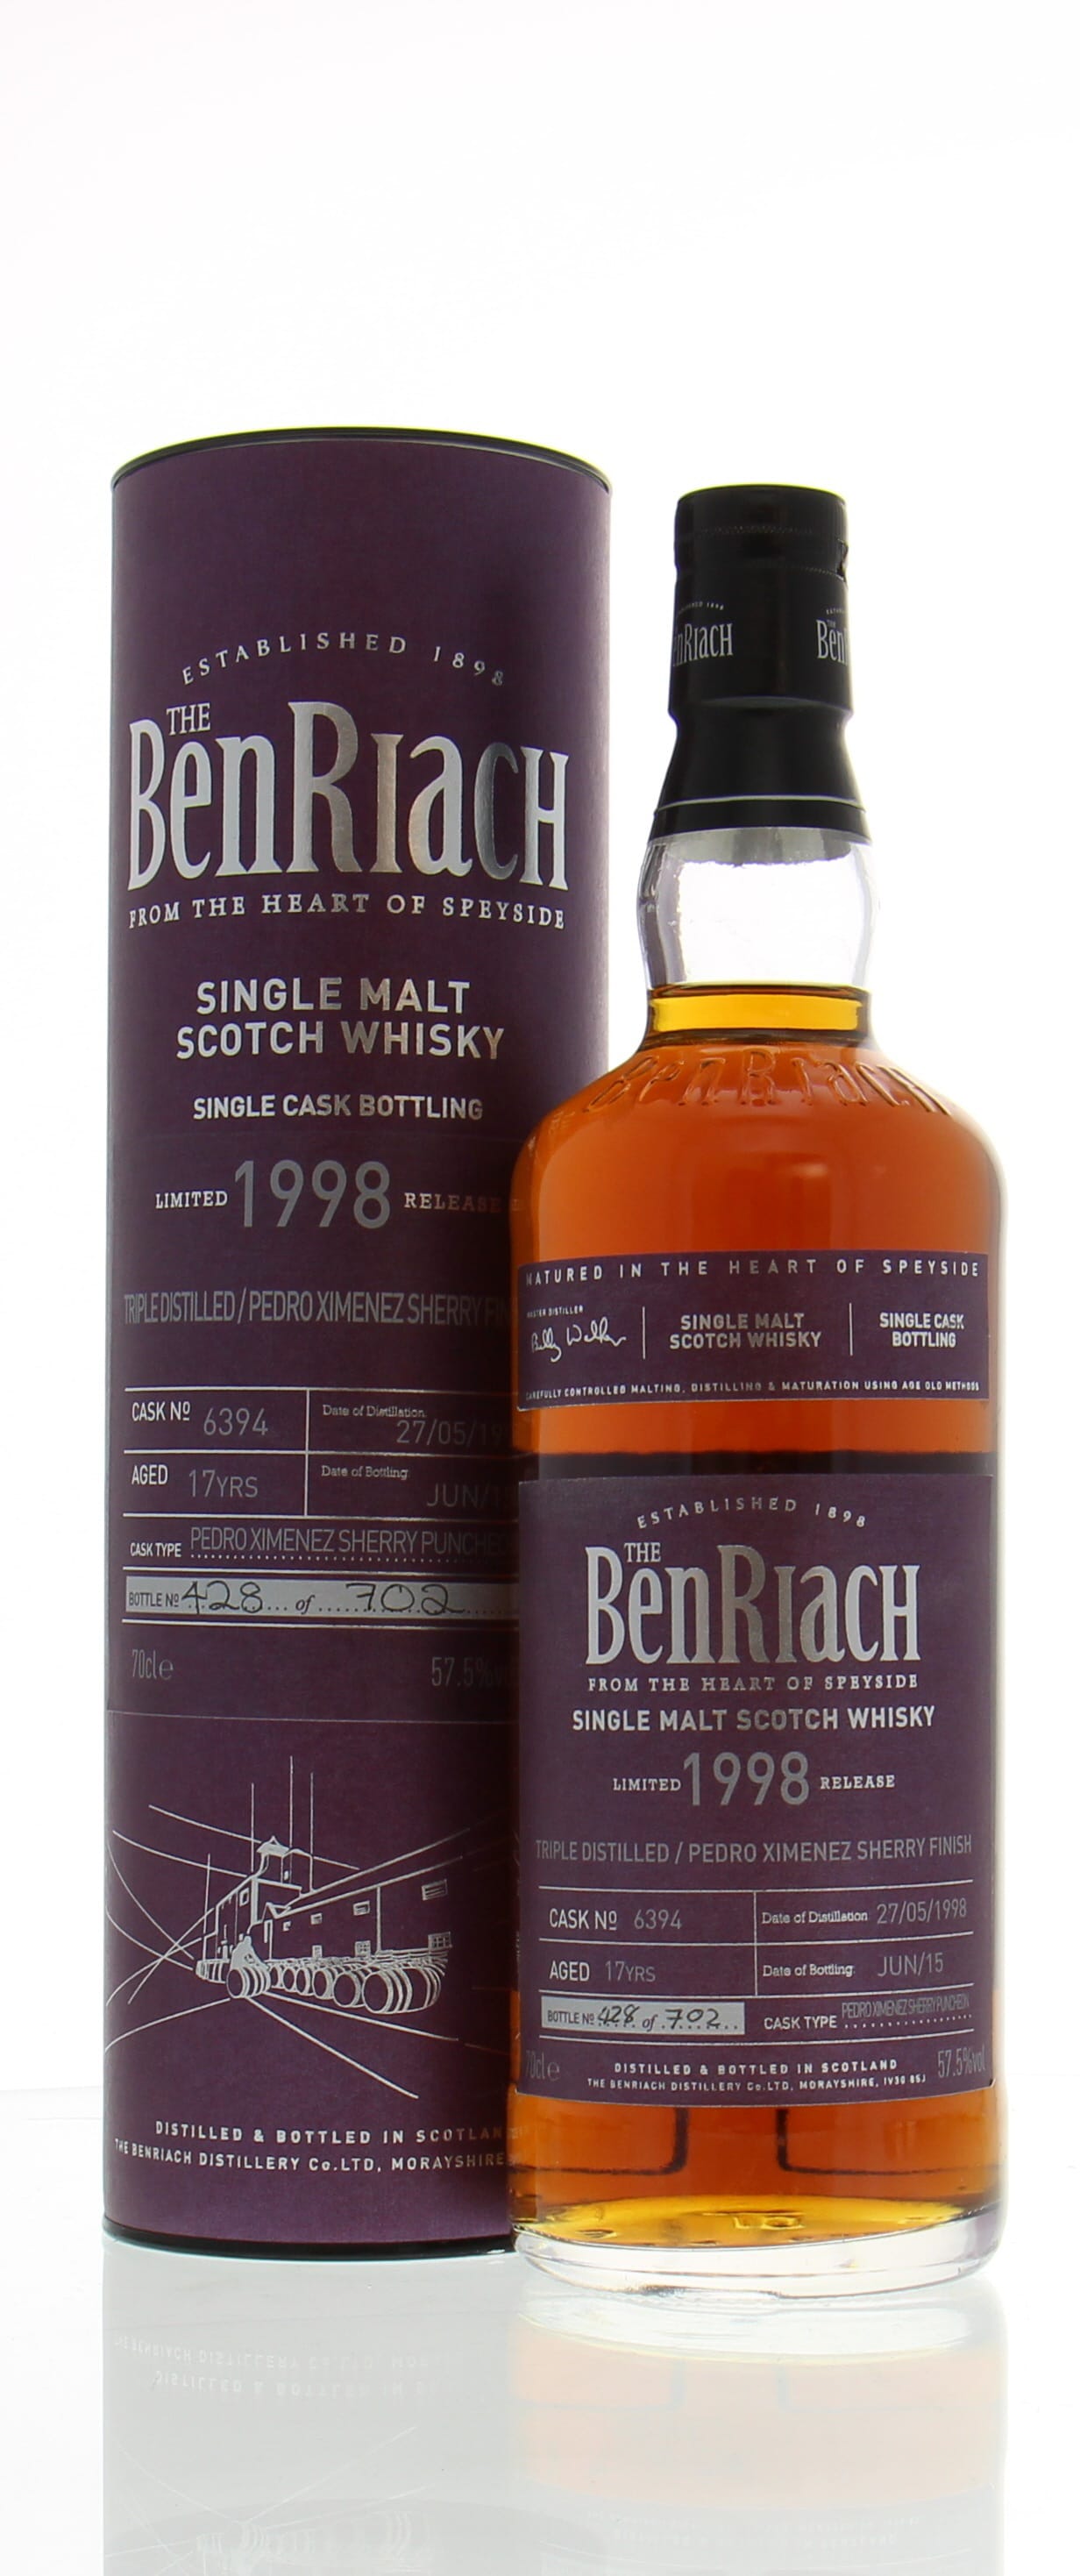 Benriach - 17 Years Old Batch 12 Cask:6394 57.5% 1998 In Original Container